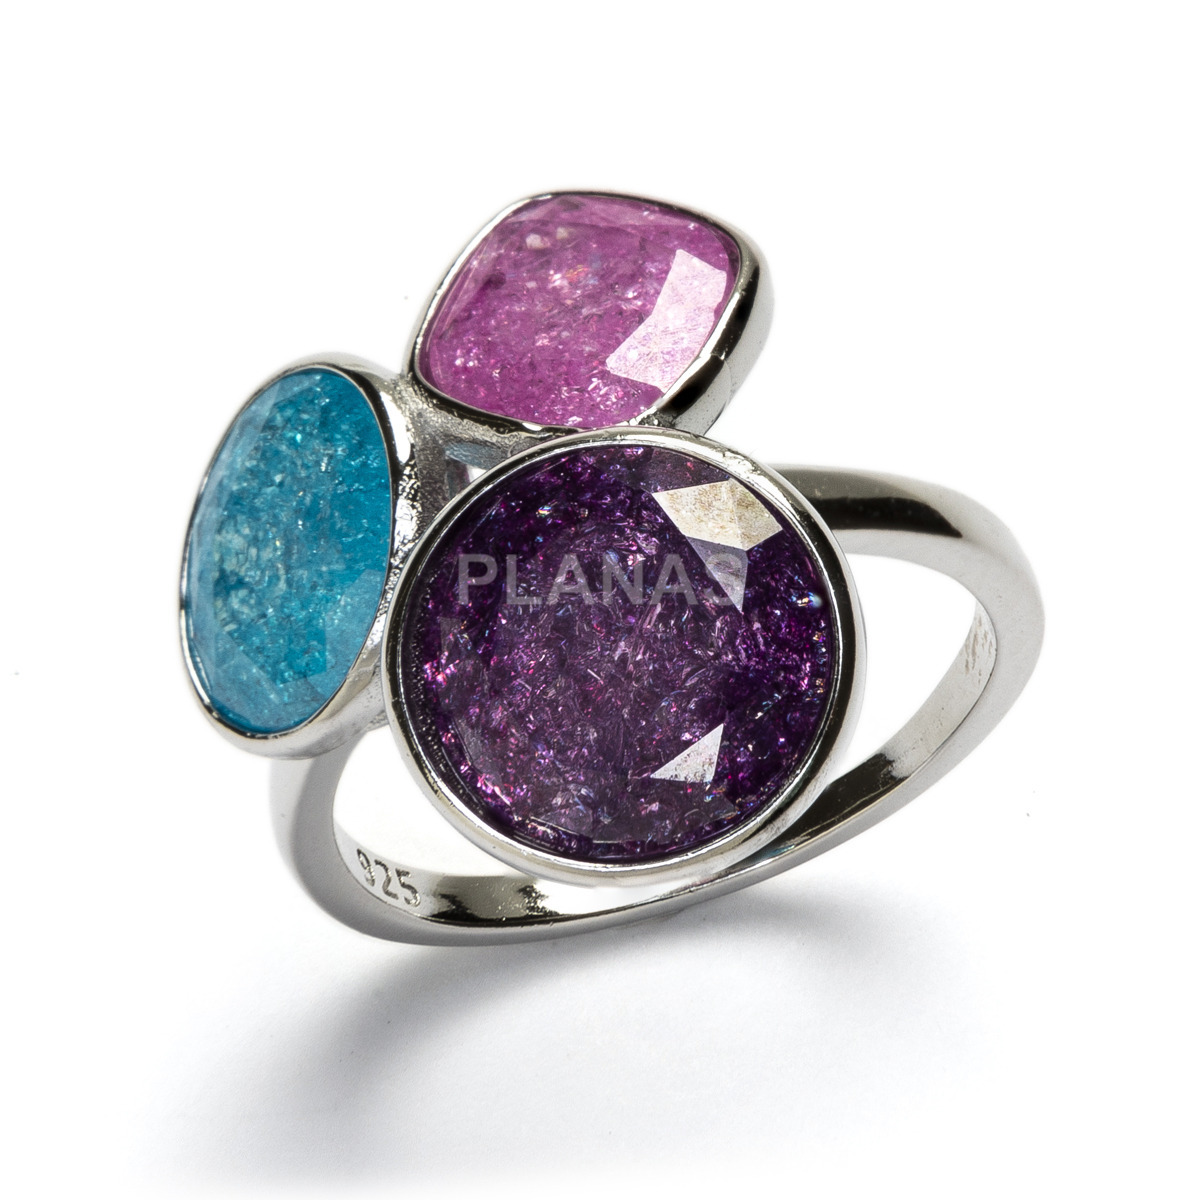 Ring in rhodium-plated sterling silver and colored zircons.